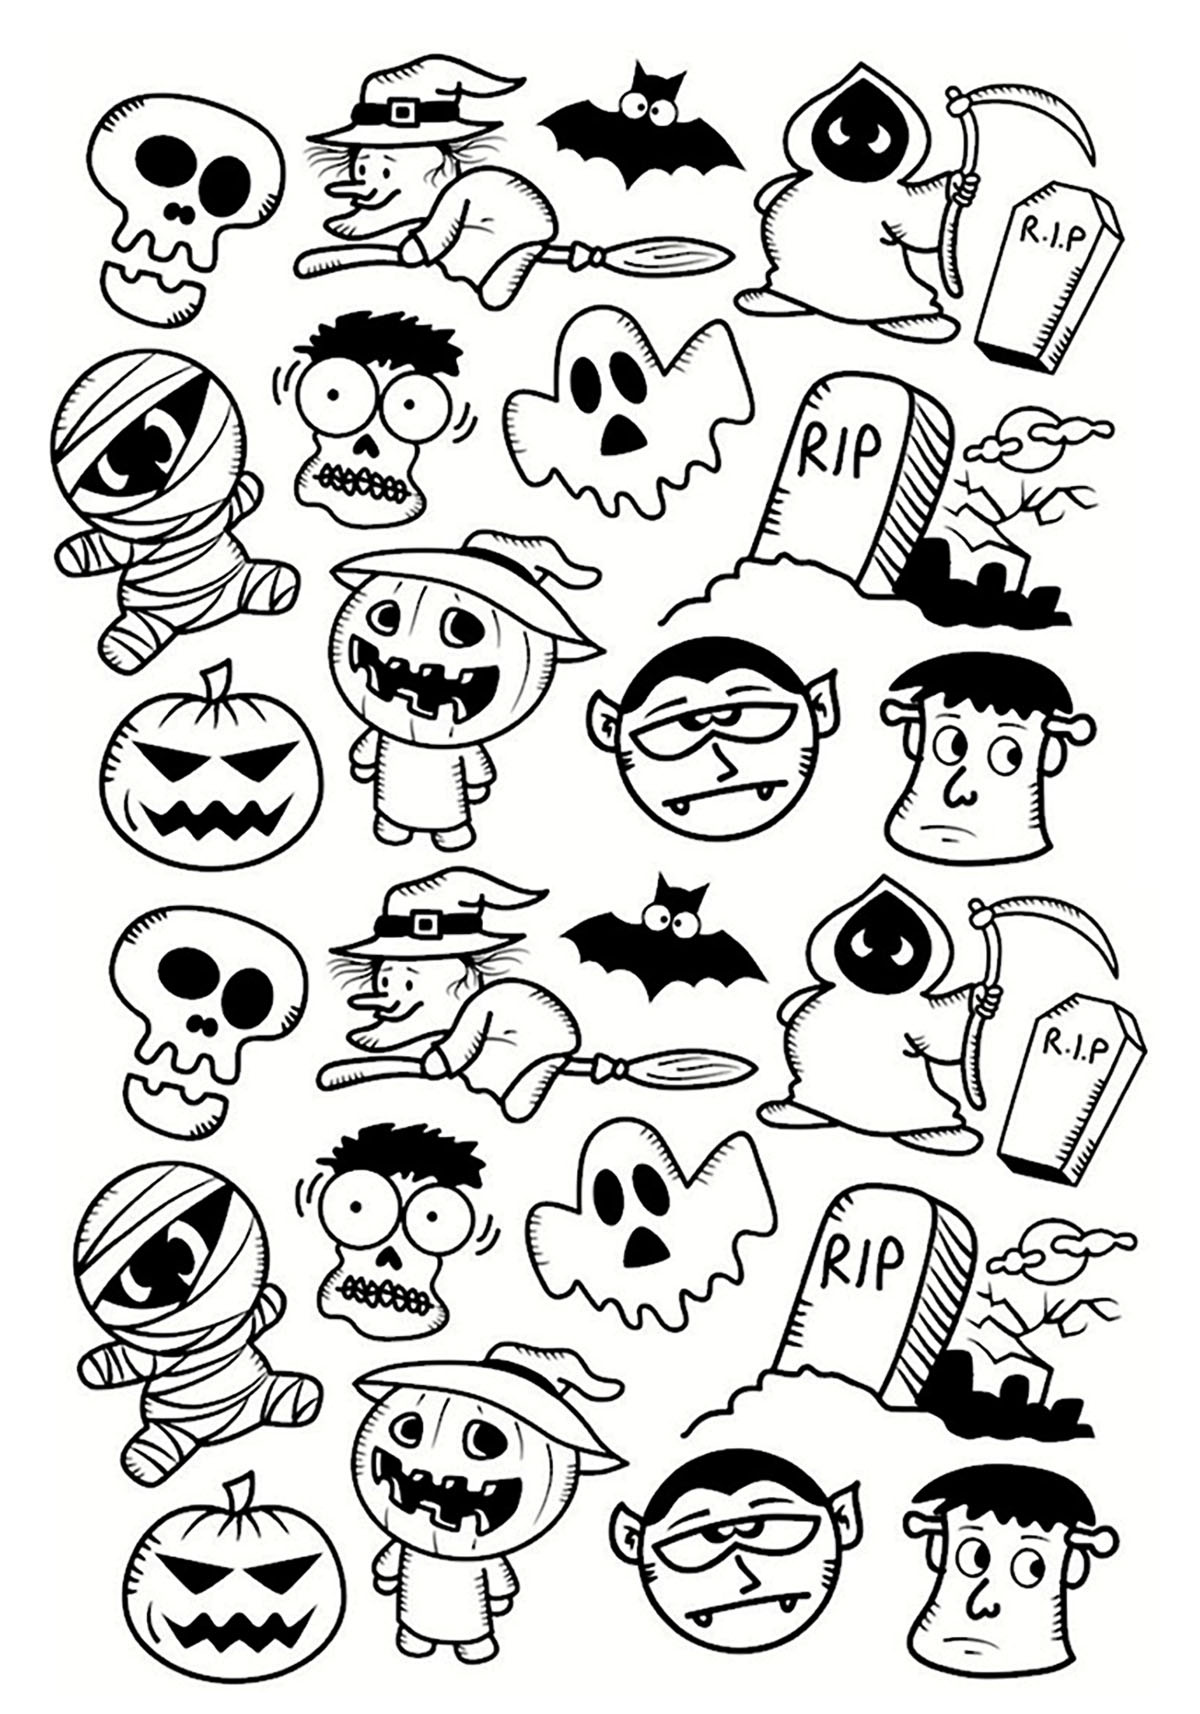 halloween adult coloring pages image=events halloween coloring adult halloween doodle characters 1